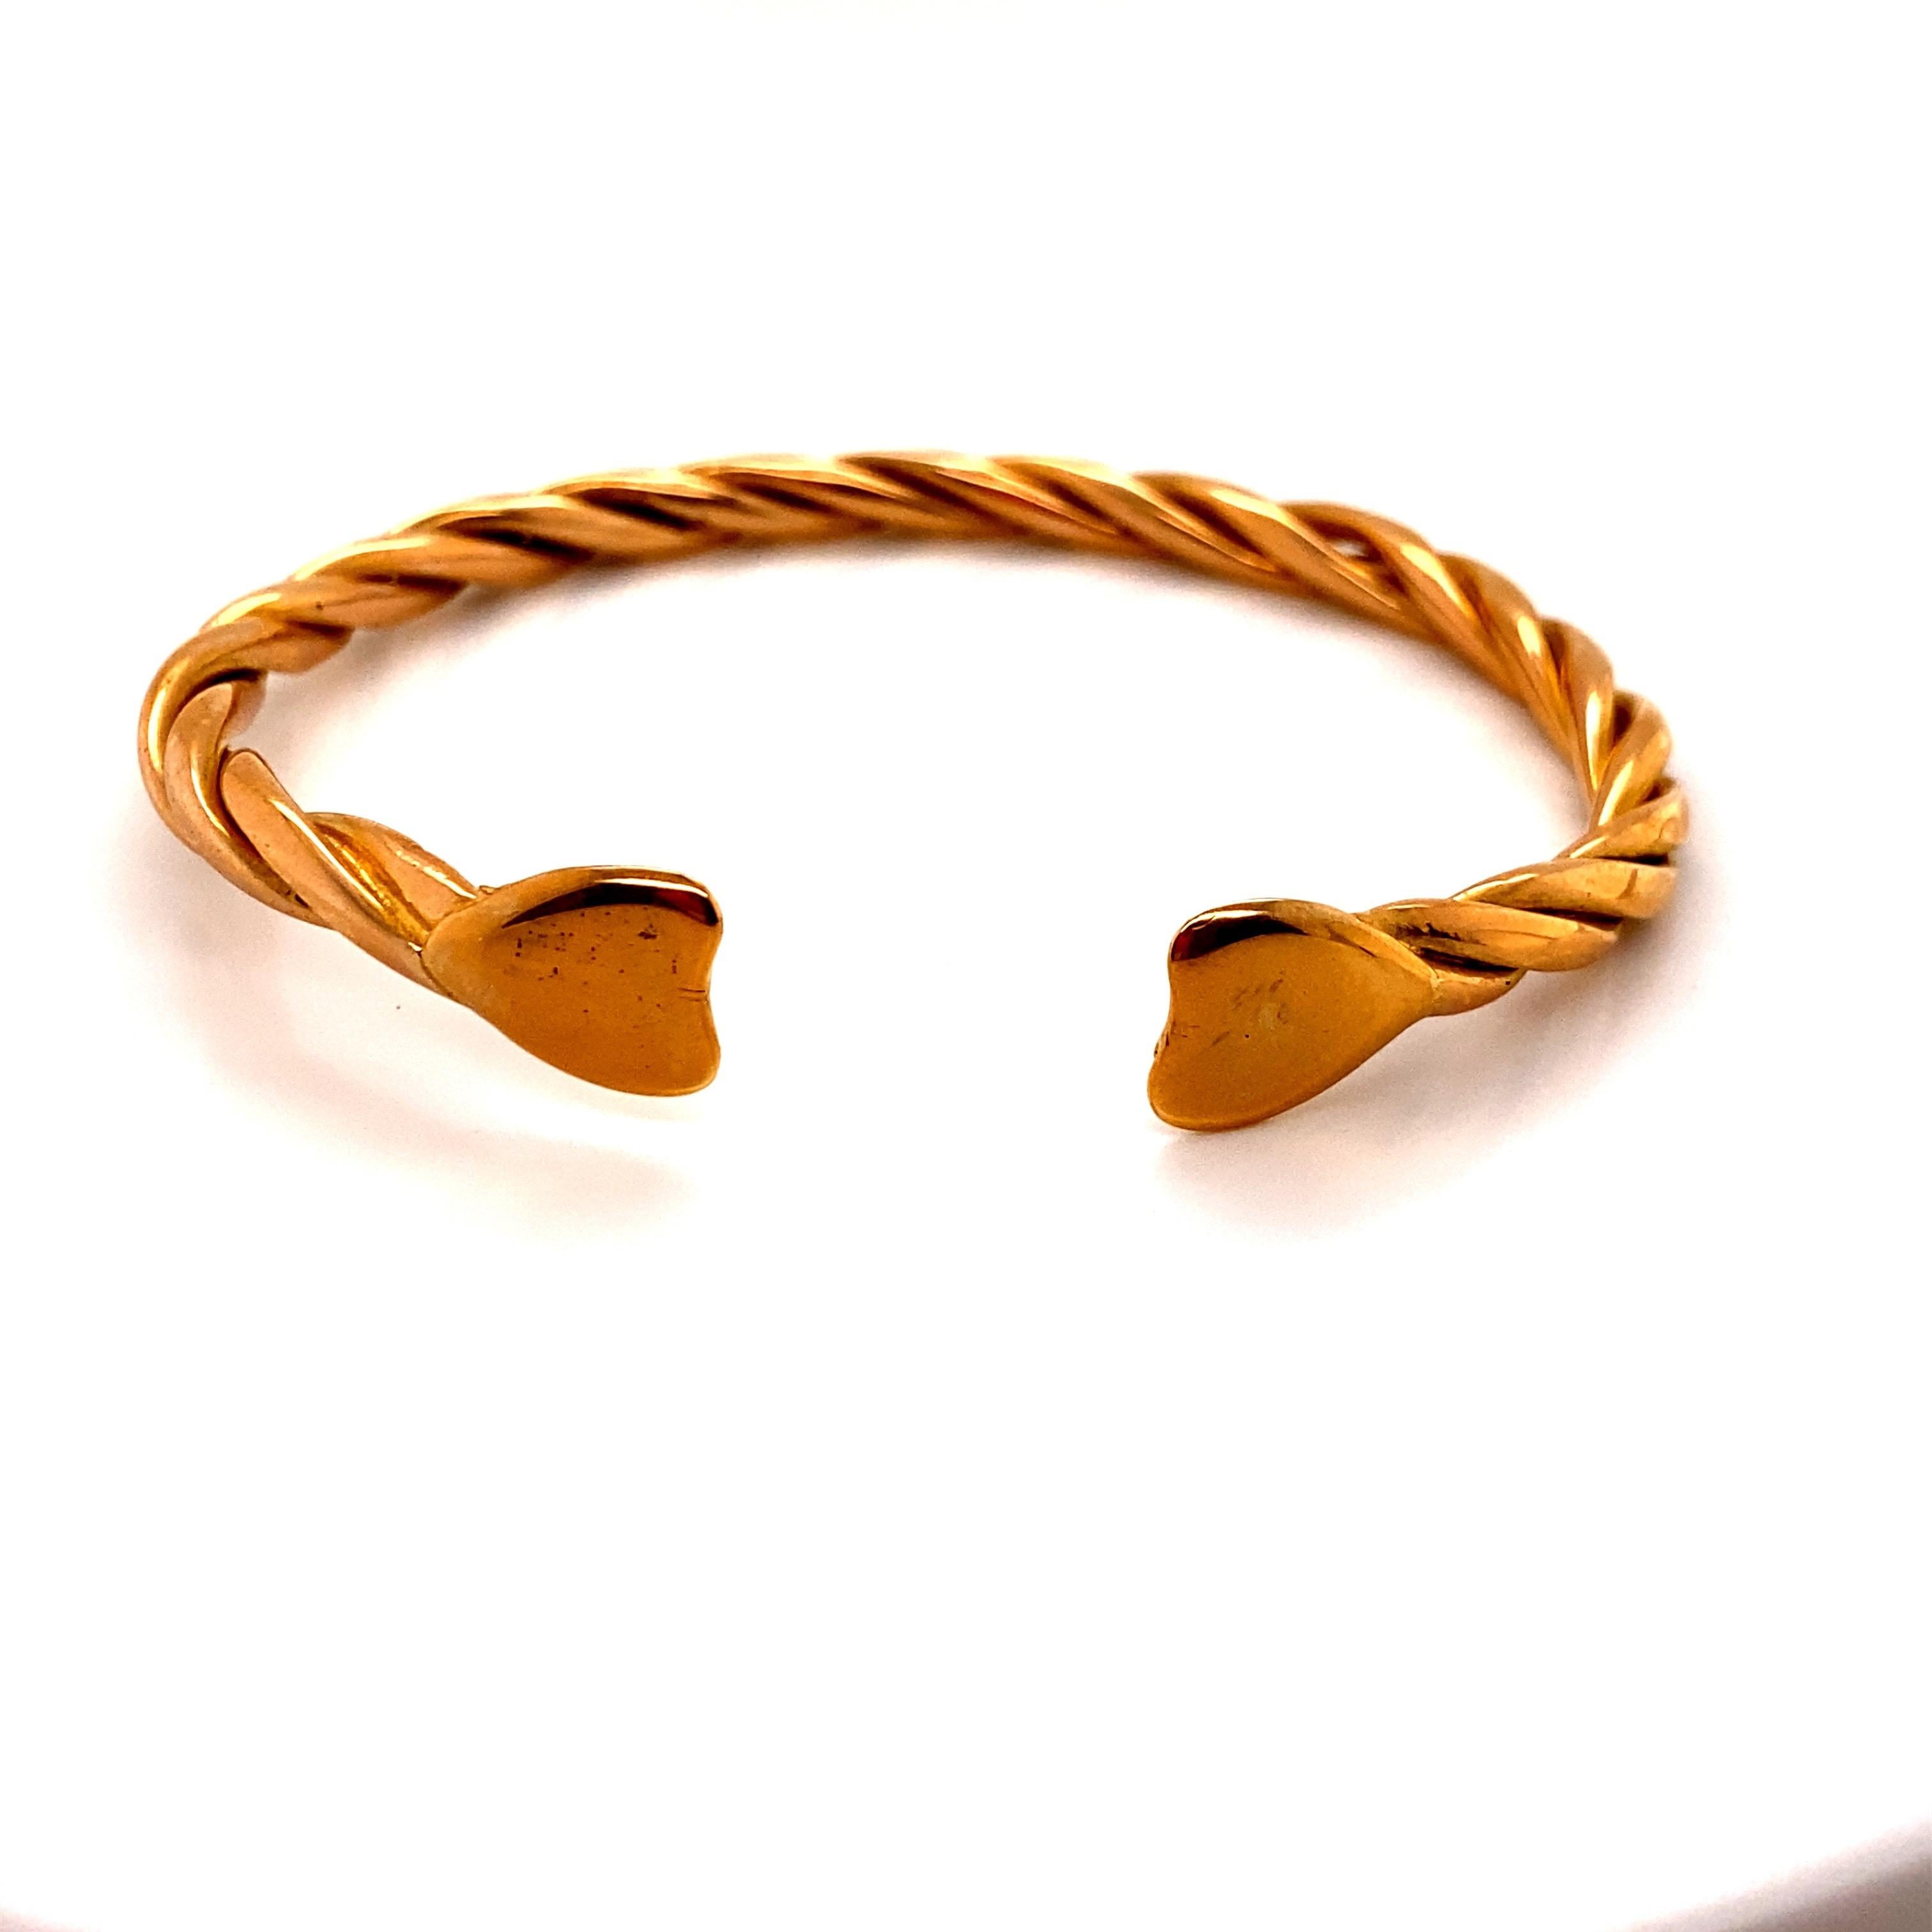 20K Yellow Gold Twist Cable Cuff Bangle Bracelet In Good Condition For Sale In Boston, MA